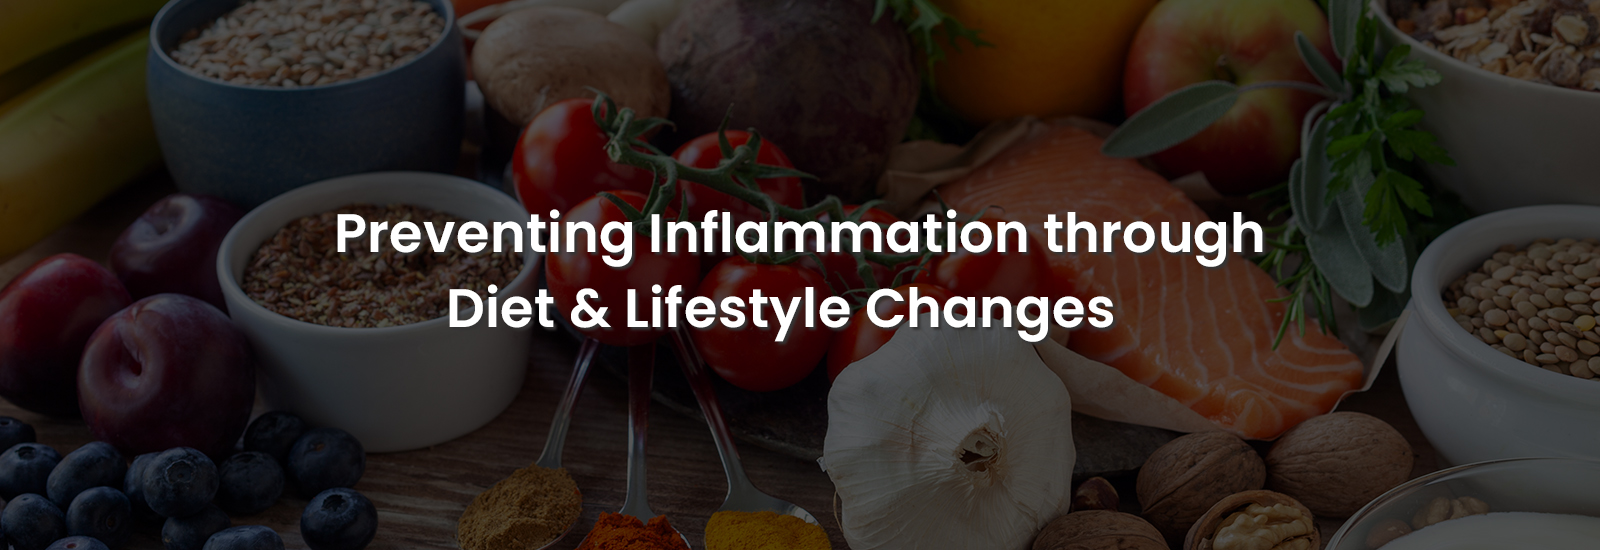 Preventing Inflammation Through Diet & Lifestyle Changes | Banner Image